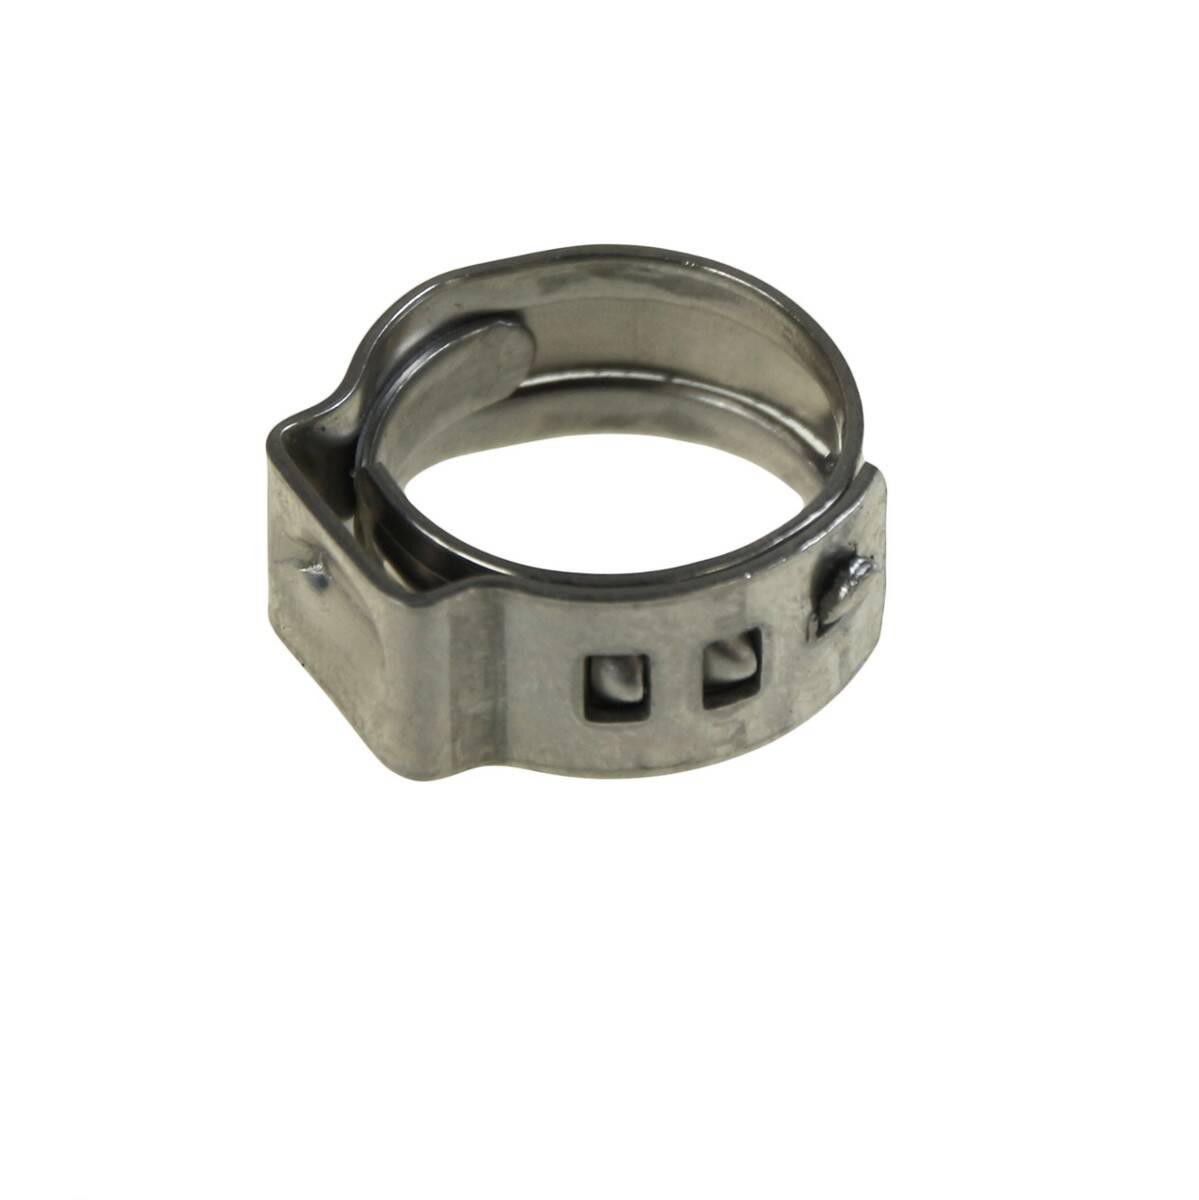 HOSE CLAMP 10.8-13.3 mm 7-0.6 STAINLESS STEEL